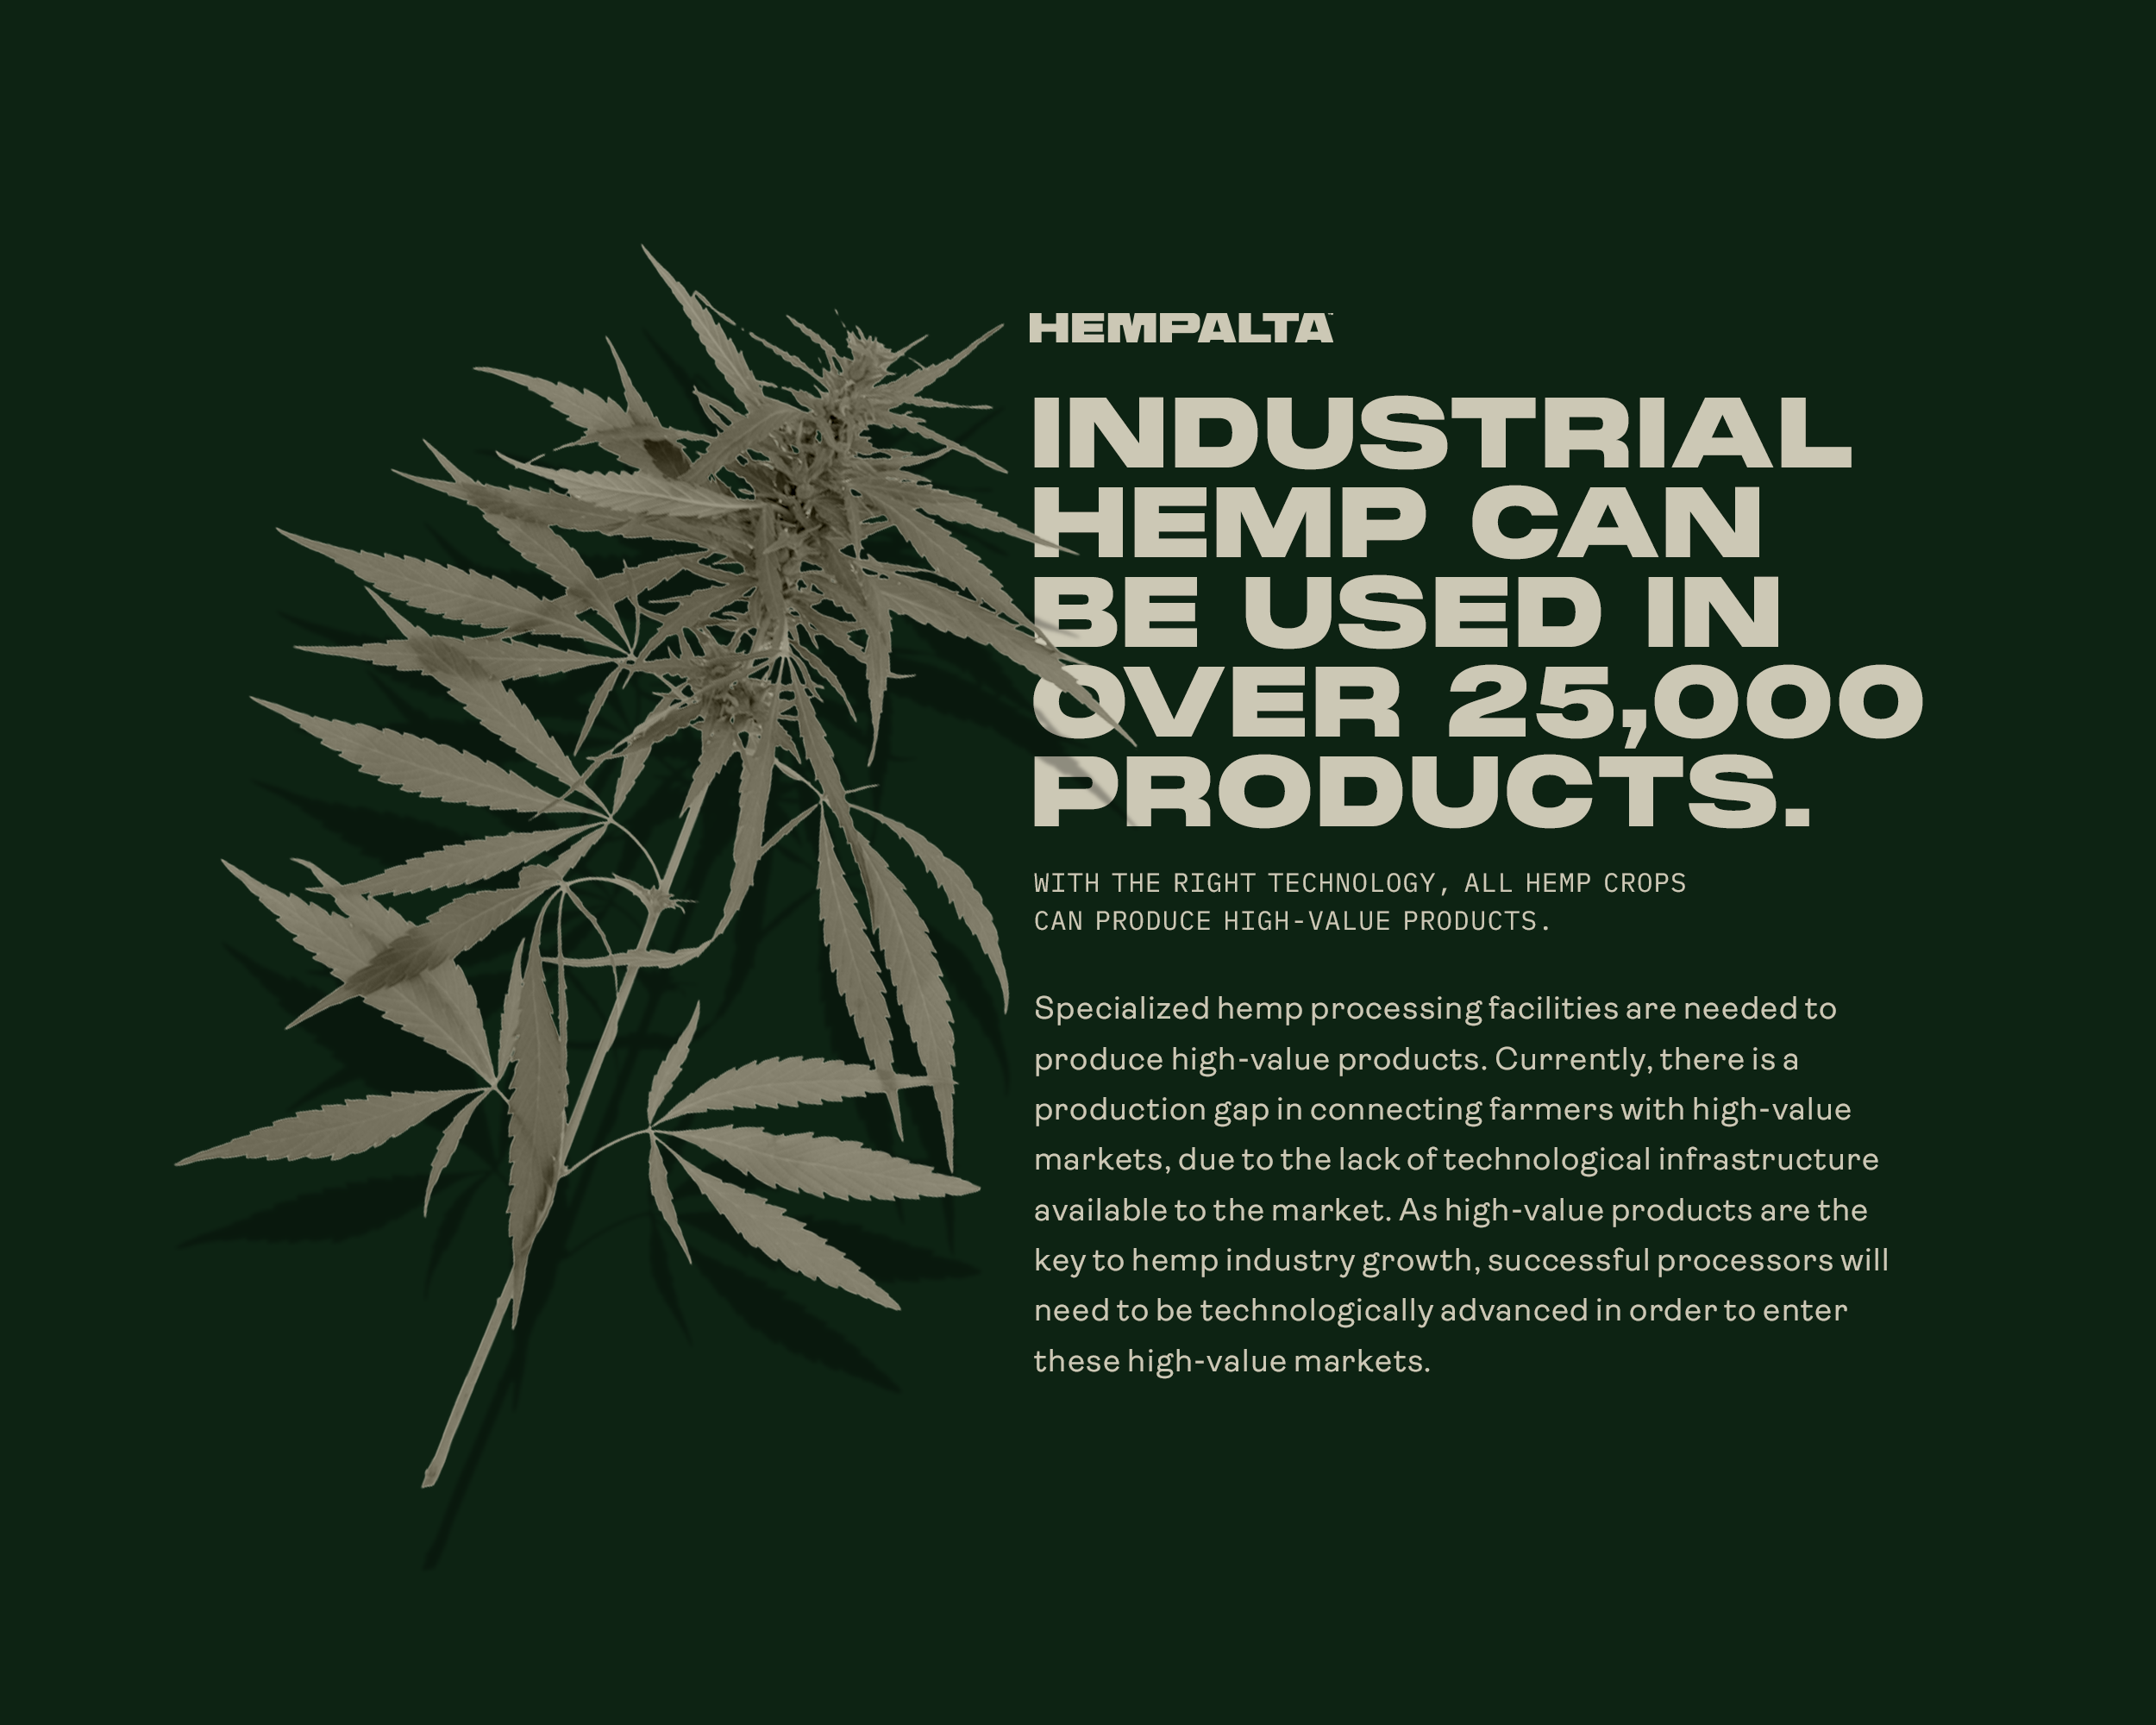 Hempalta illustration: Industrial hemp can be used in over 25,000 products